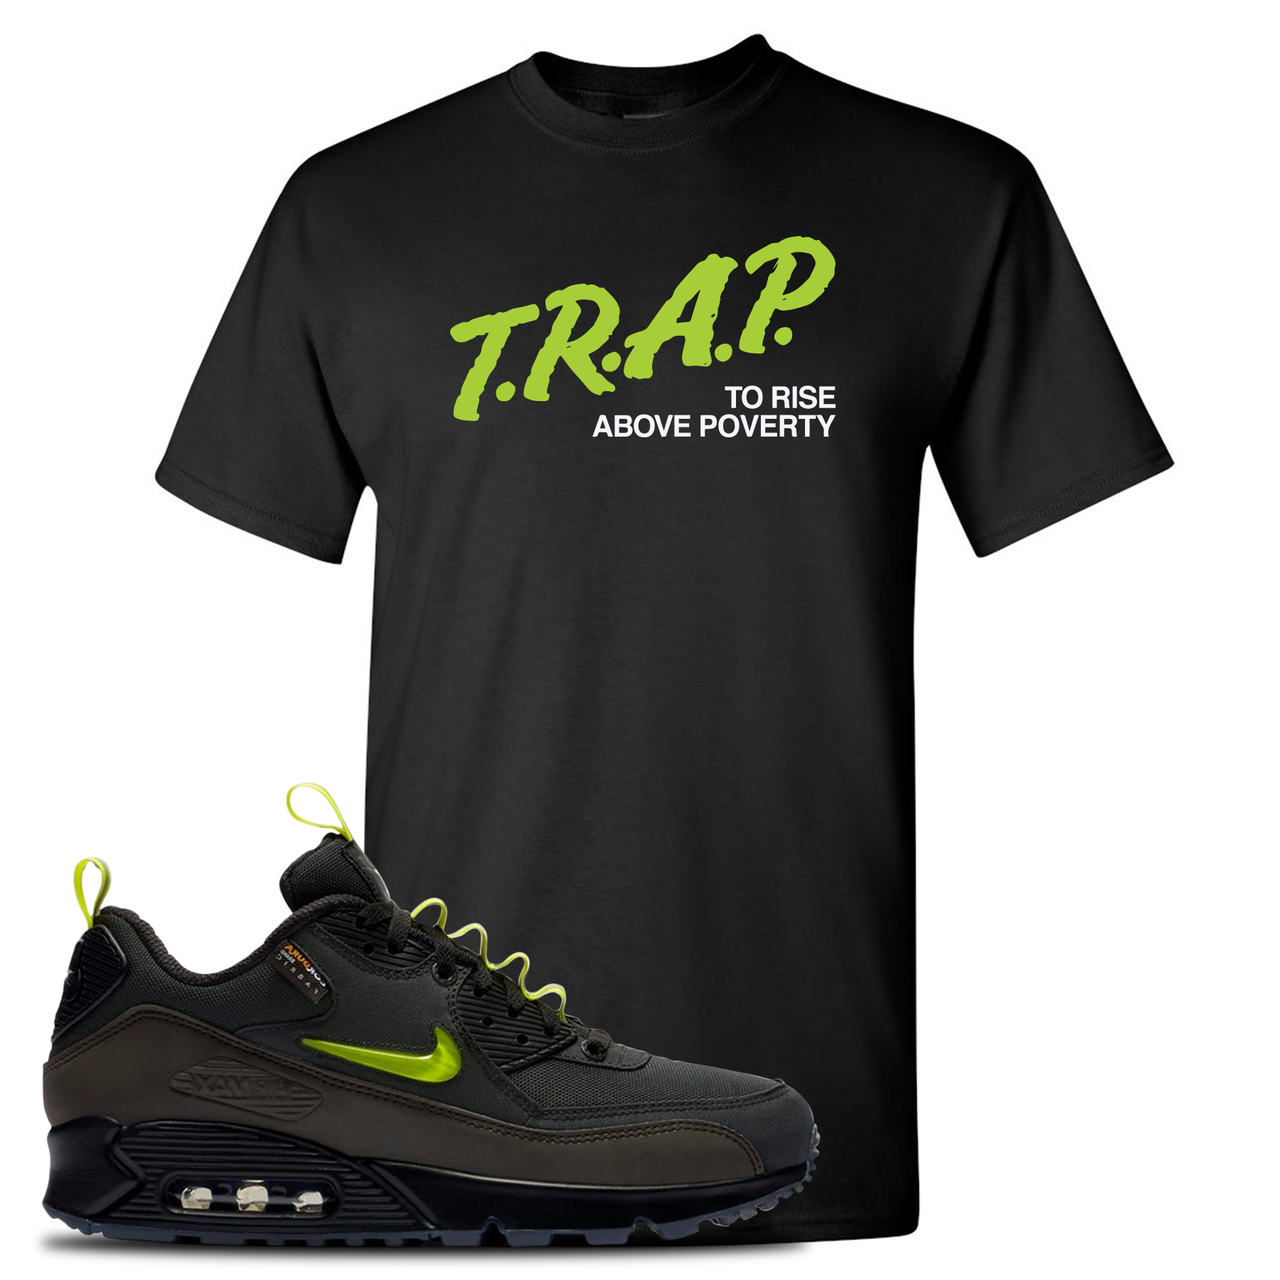 The Basement X Air Max 90 Manchester Trap to Rise Above Poverty Black Sneaker Hook Up T-Shirt